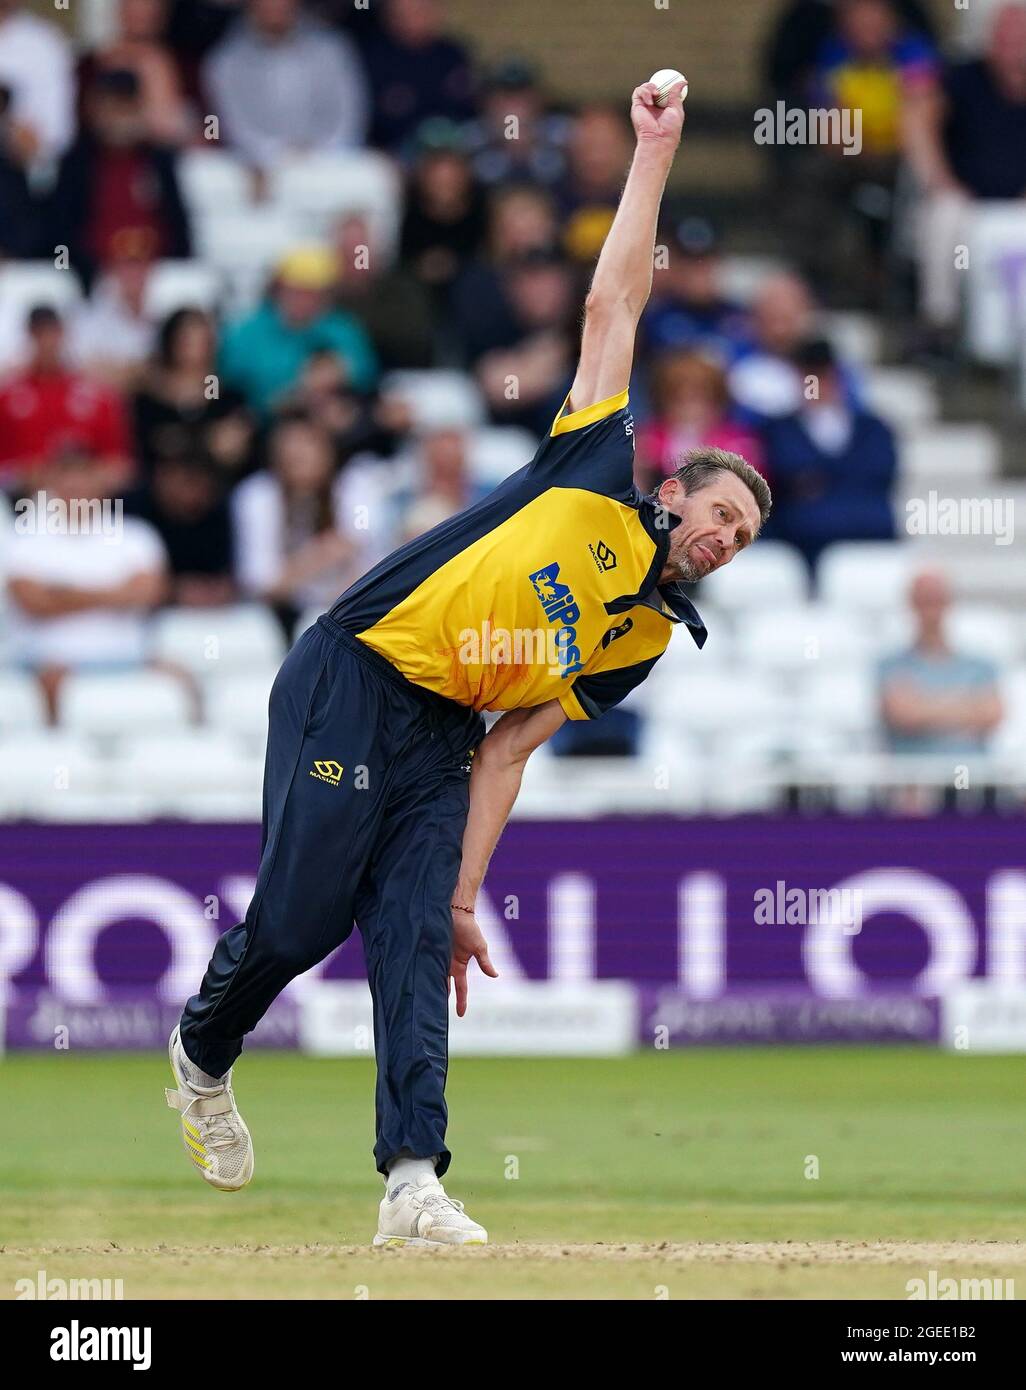 Glamorgan's Michael Hogan during the Royal London One-Day Cup Final at Trent Bridge, Nottingham. Picture date: Thursday August 19, 2021. See PA story CRICKET Final. Photo credit should read: Zac Goodwin/PA Wire. RESTRICTIONS: No commercial use without prior written consent of the ECB. Still image use only. No moving images to emulate broadcast. Editorial use only. No removing or obscuring of sponsor logos. Stock Photo